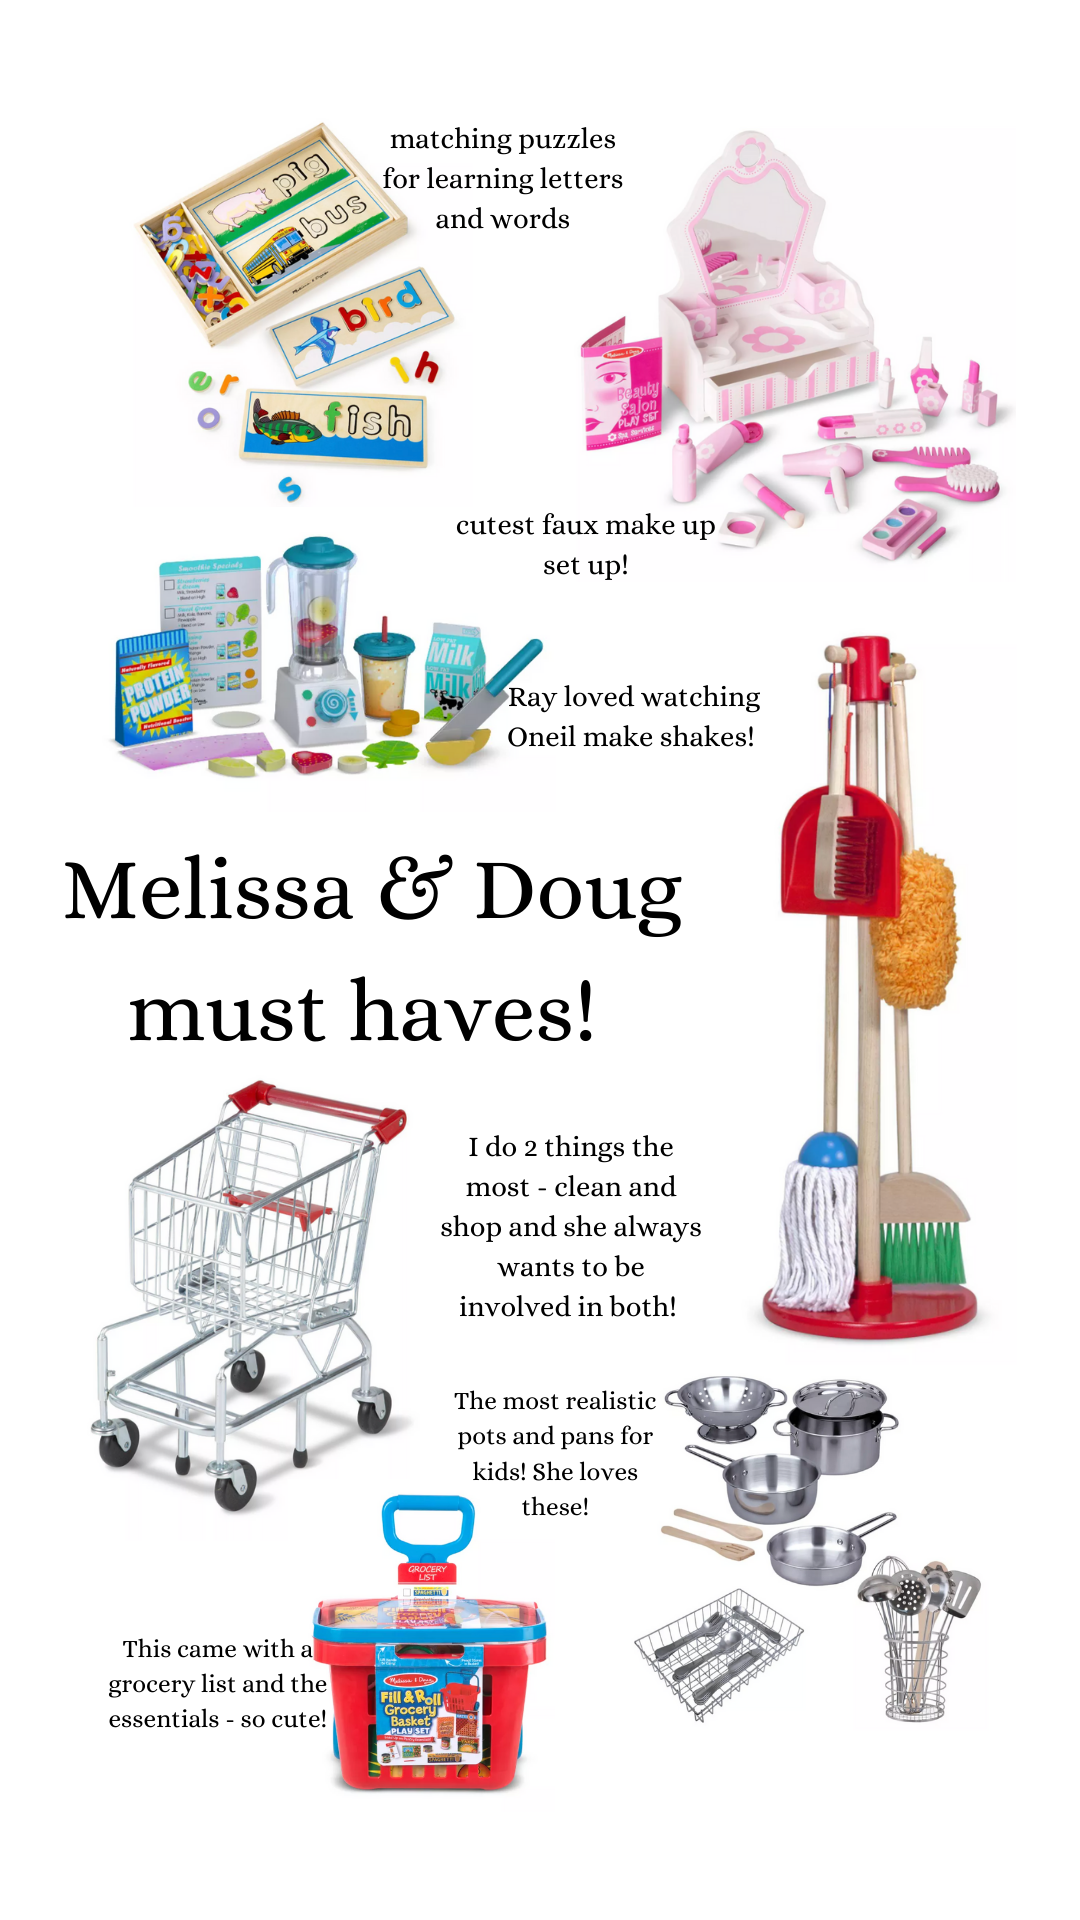 Melissa & Doug Gift Guide for Toddlers